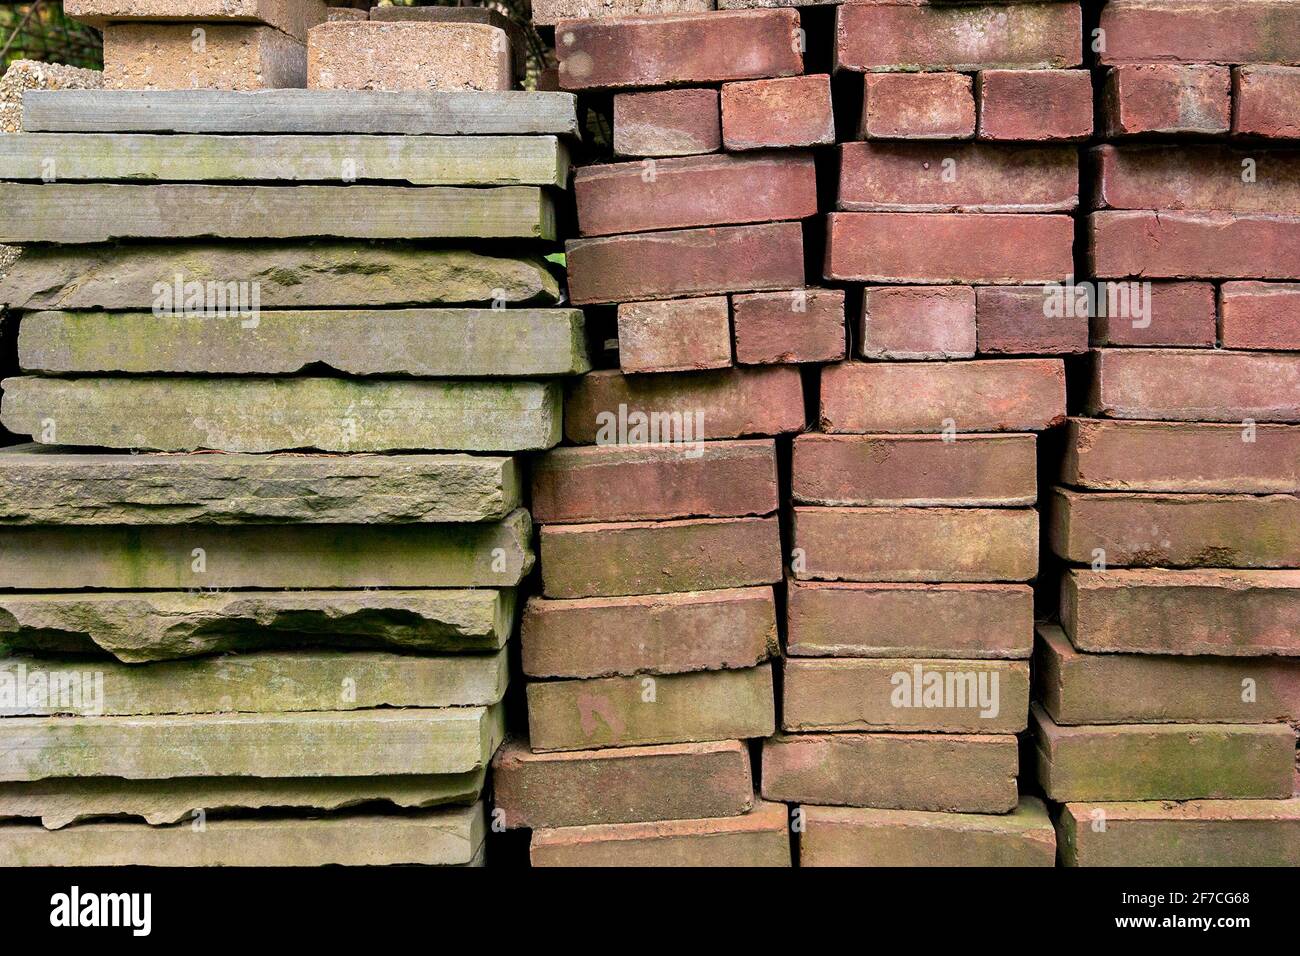 Brick blocks, slate slabs and other building materials are seen stacked on early springtime April day in moody, abstract, grunge background image Stock Photo